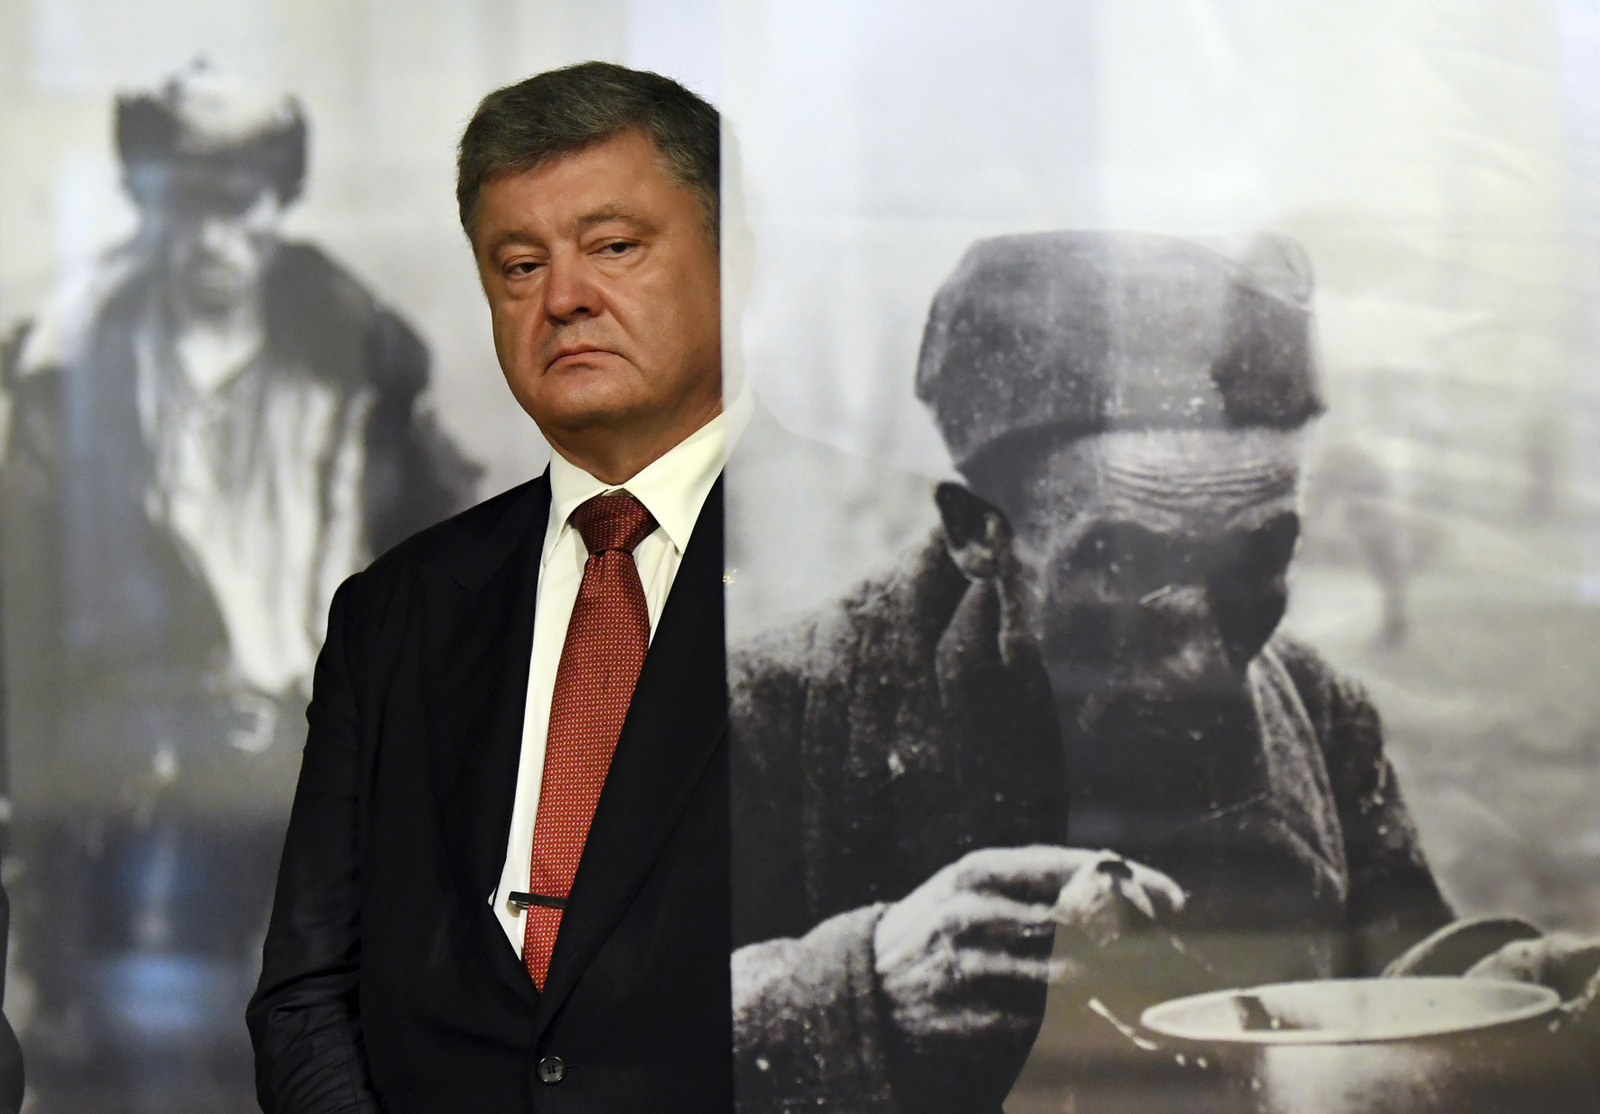 Ukrainian President Petro Poroshenko looks at pictures at an exhibition in the former Nazi concentration camp Sachsenhausen, Germany, Saturday, May 20, 2017. (Ralf Hirschberger/dpa via AP)